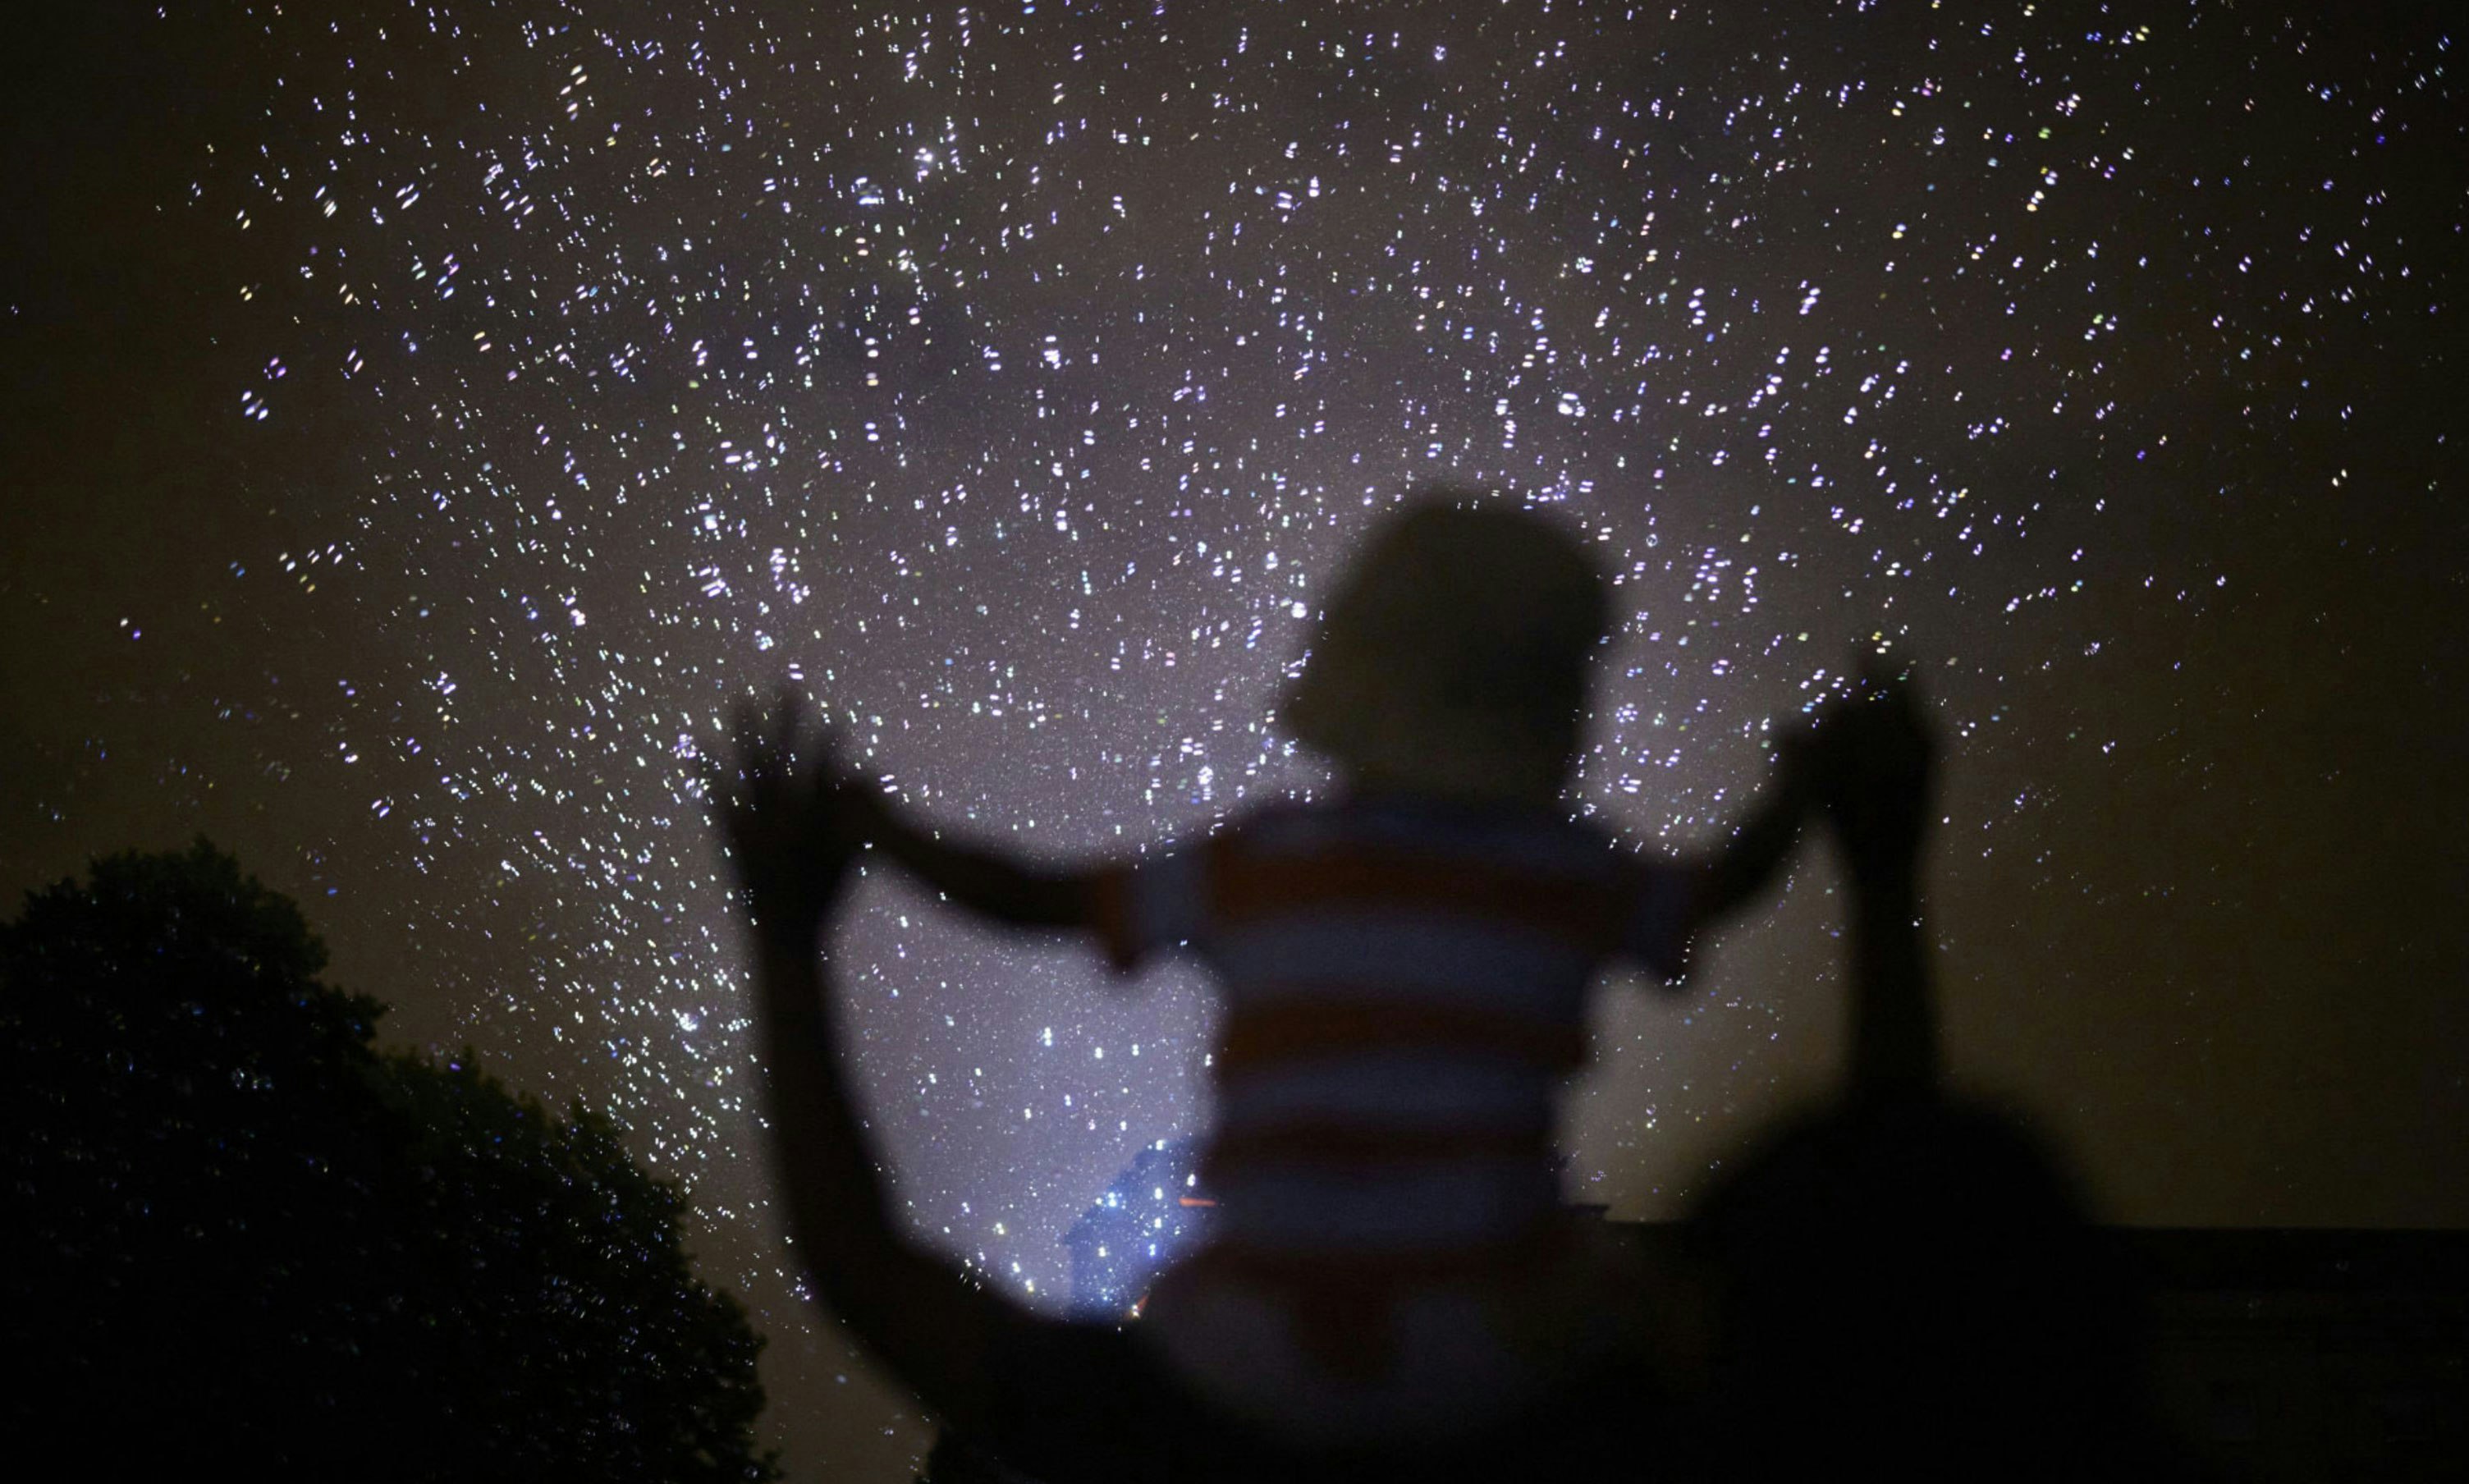 An outline of a child on an adults shoulders as they are looking up into the night sky at lots of small lights